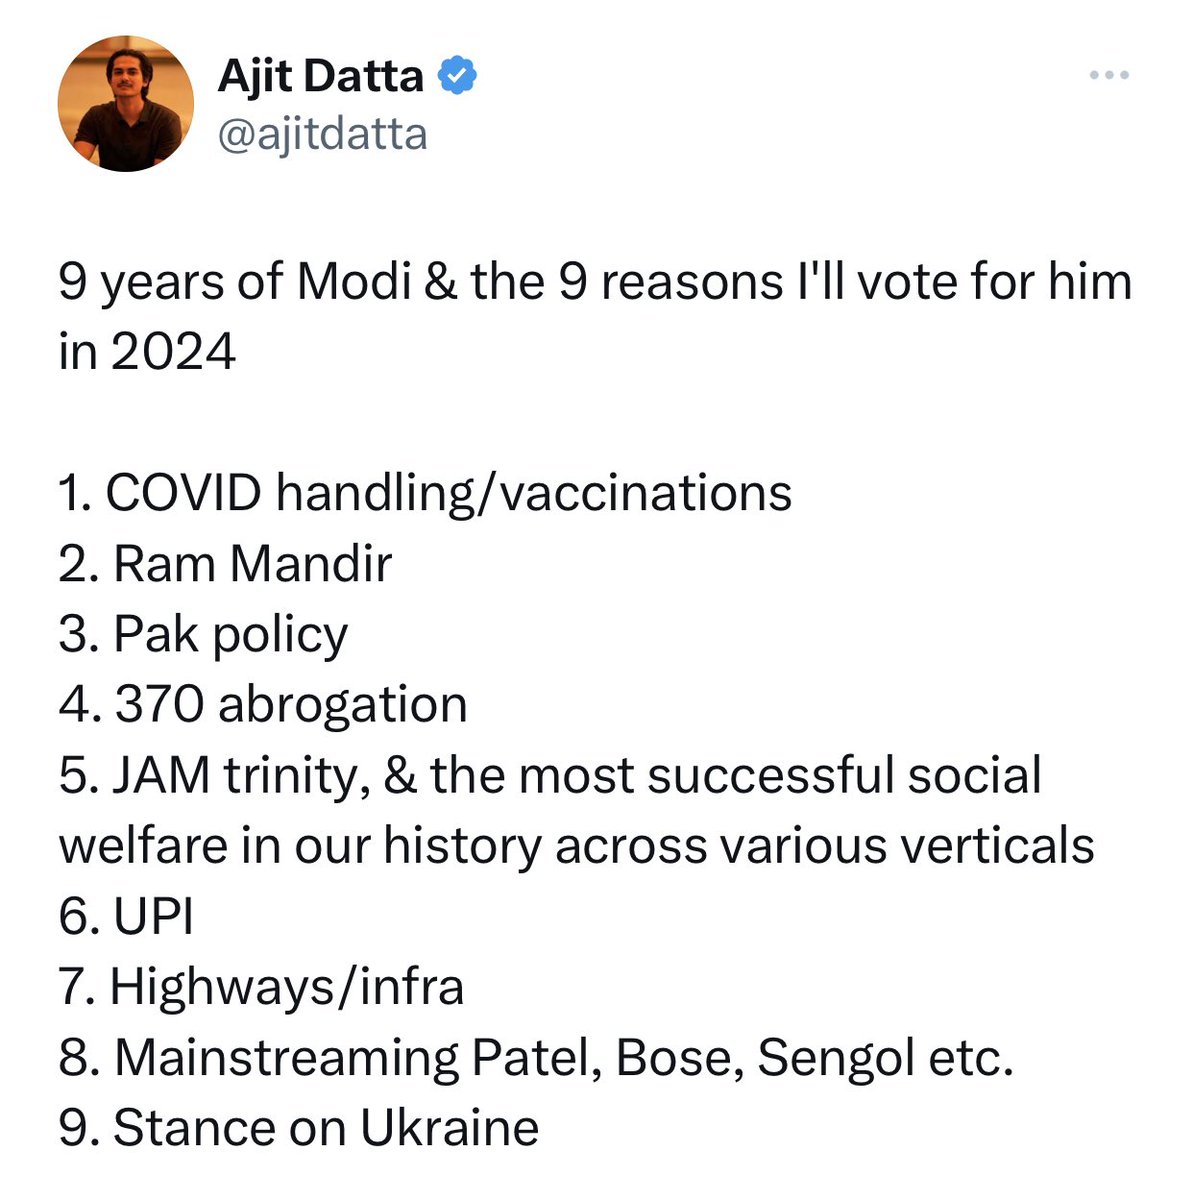 Many years of a rapist and murderer and many reasons you will vote for him in 2024
1. 2002 gujrat muslims Genocide 
2.Under Modi, violence against Muslims has become more common
3. Communal violence in Delhi that killed 53 people, 40 of them Muslim
4.Discriminatory citizenship…